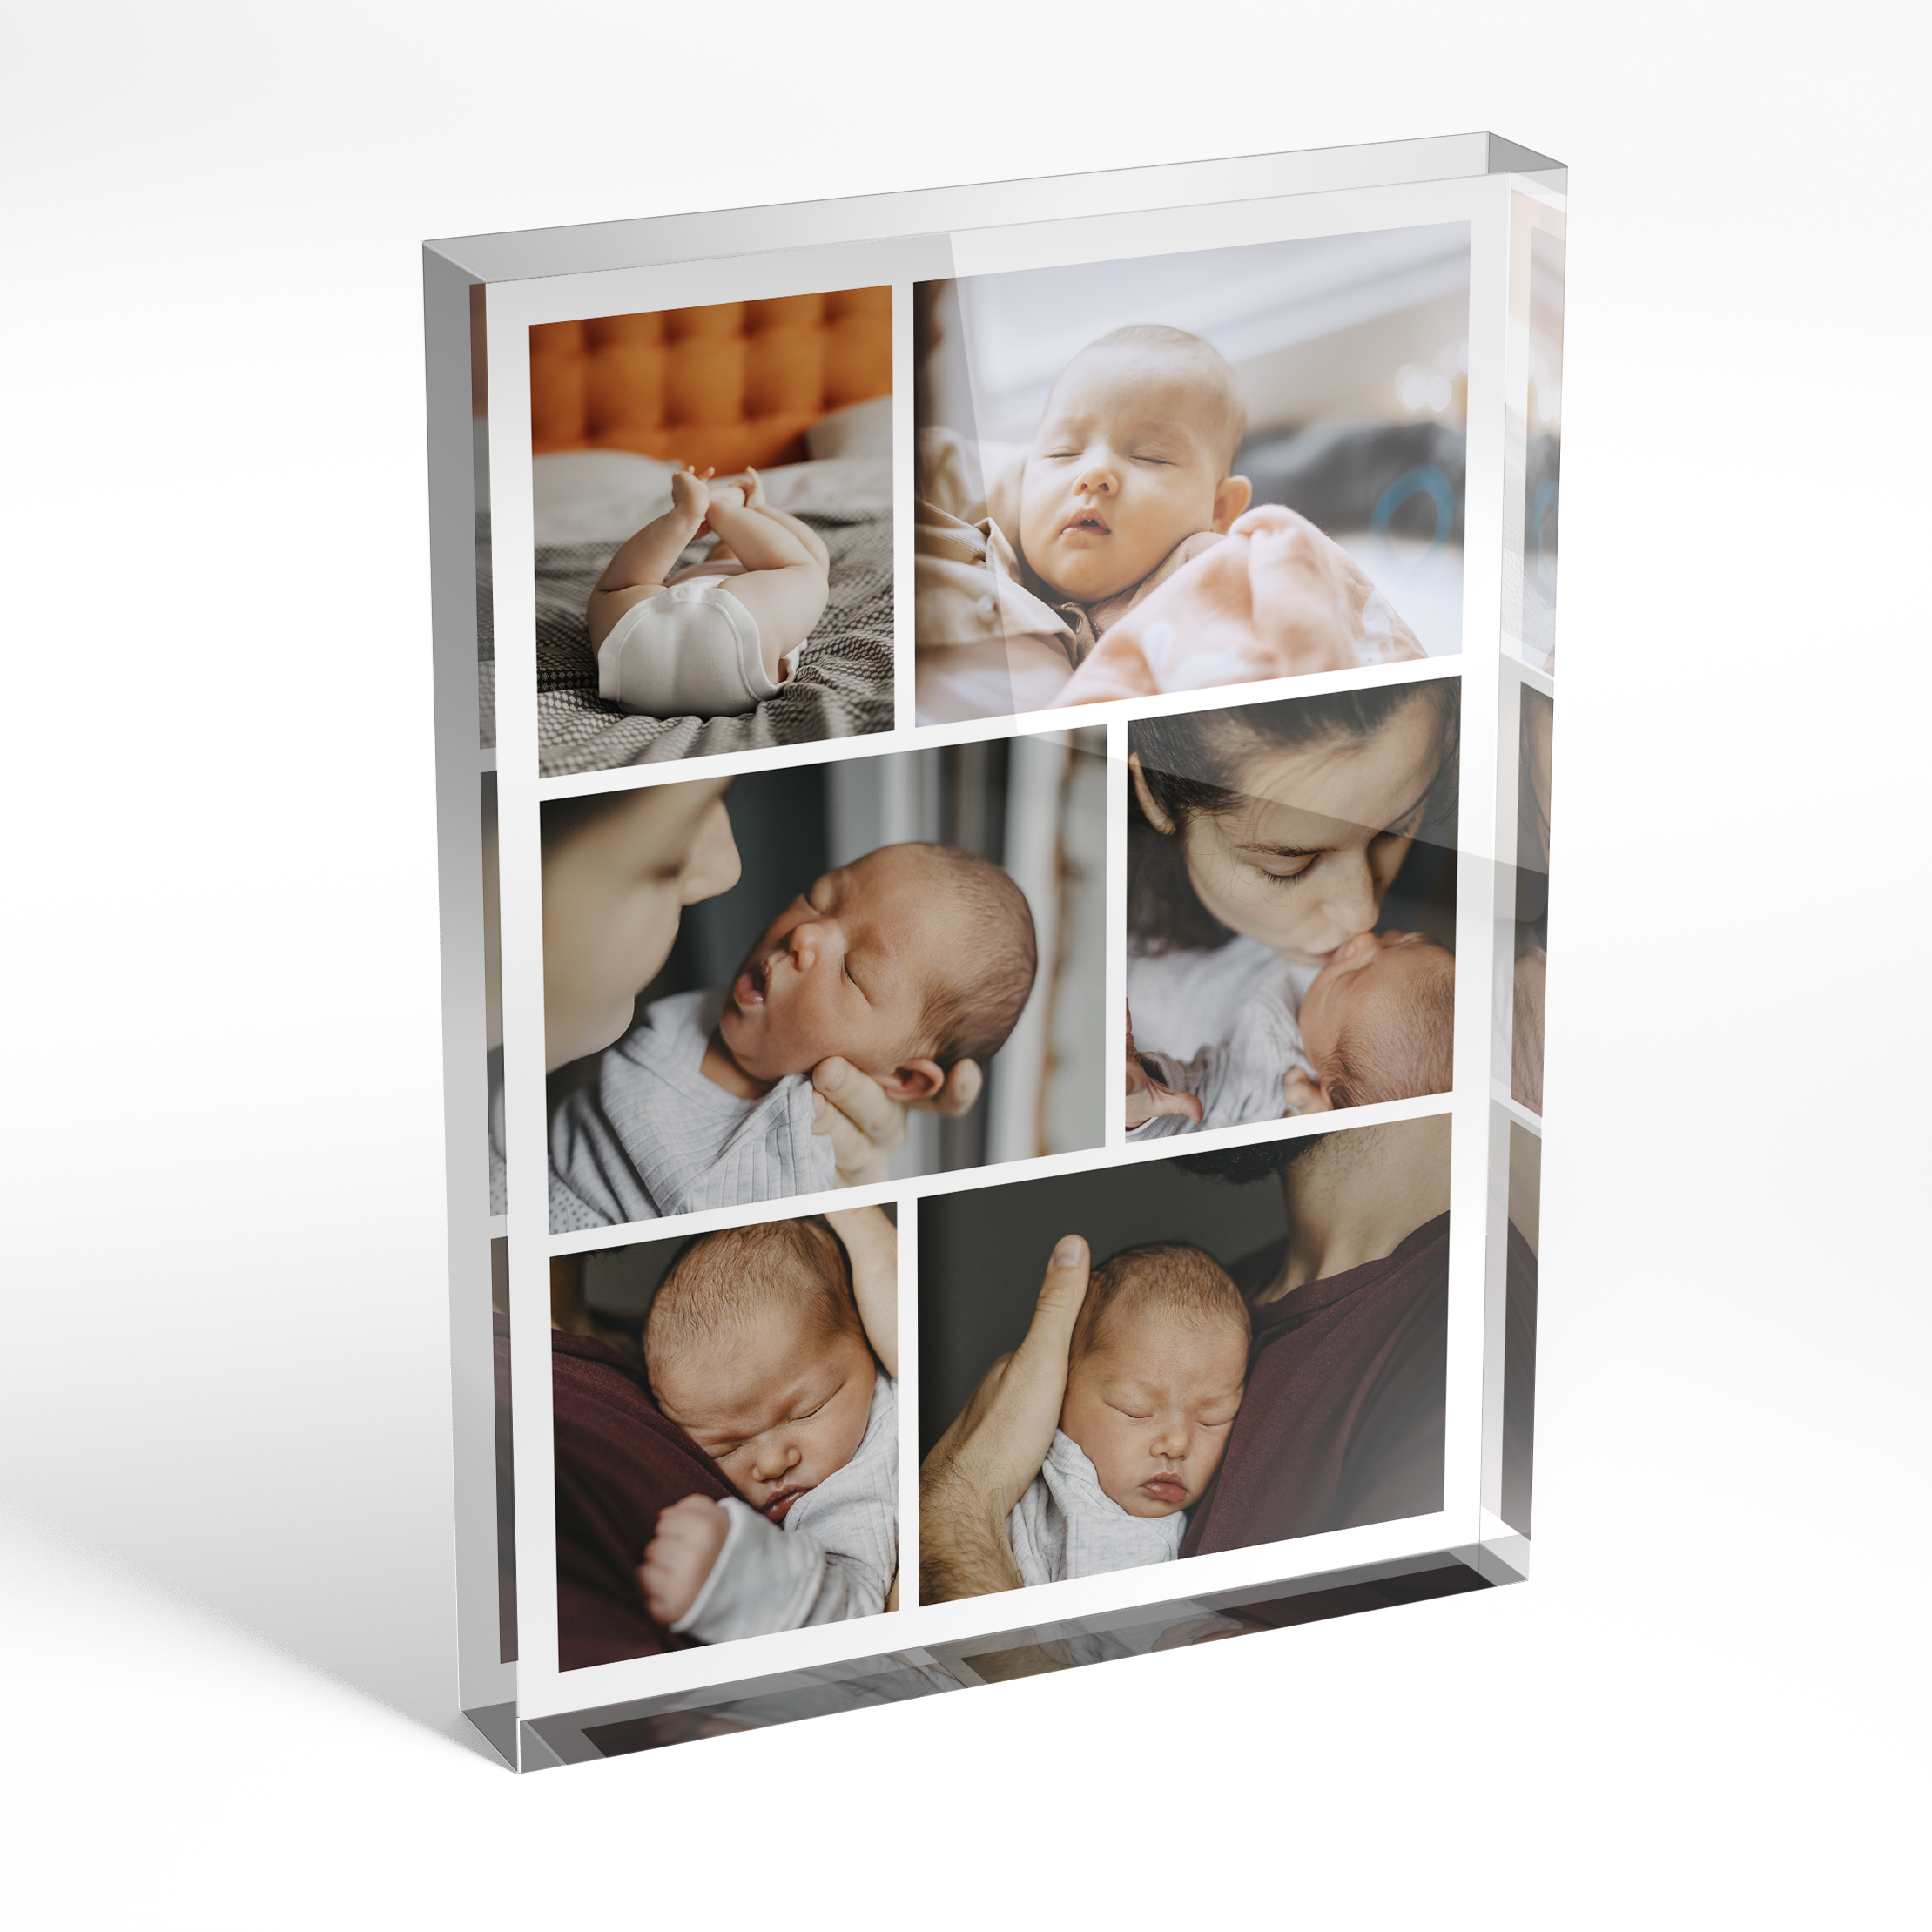 An angled side view of a portrait layout Acrylic Glass Photo Block with space for 6 photos. Thiis design is named "Memory Patchwork". 